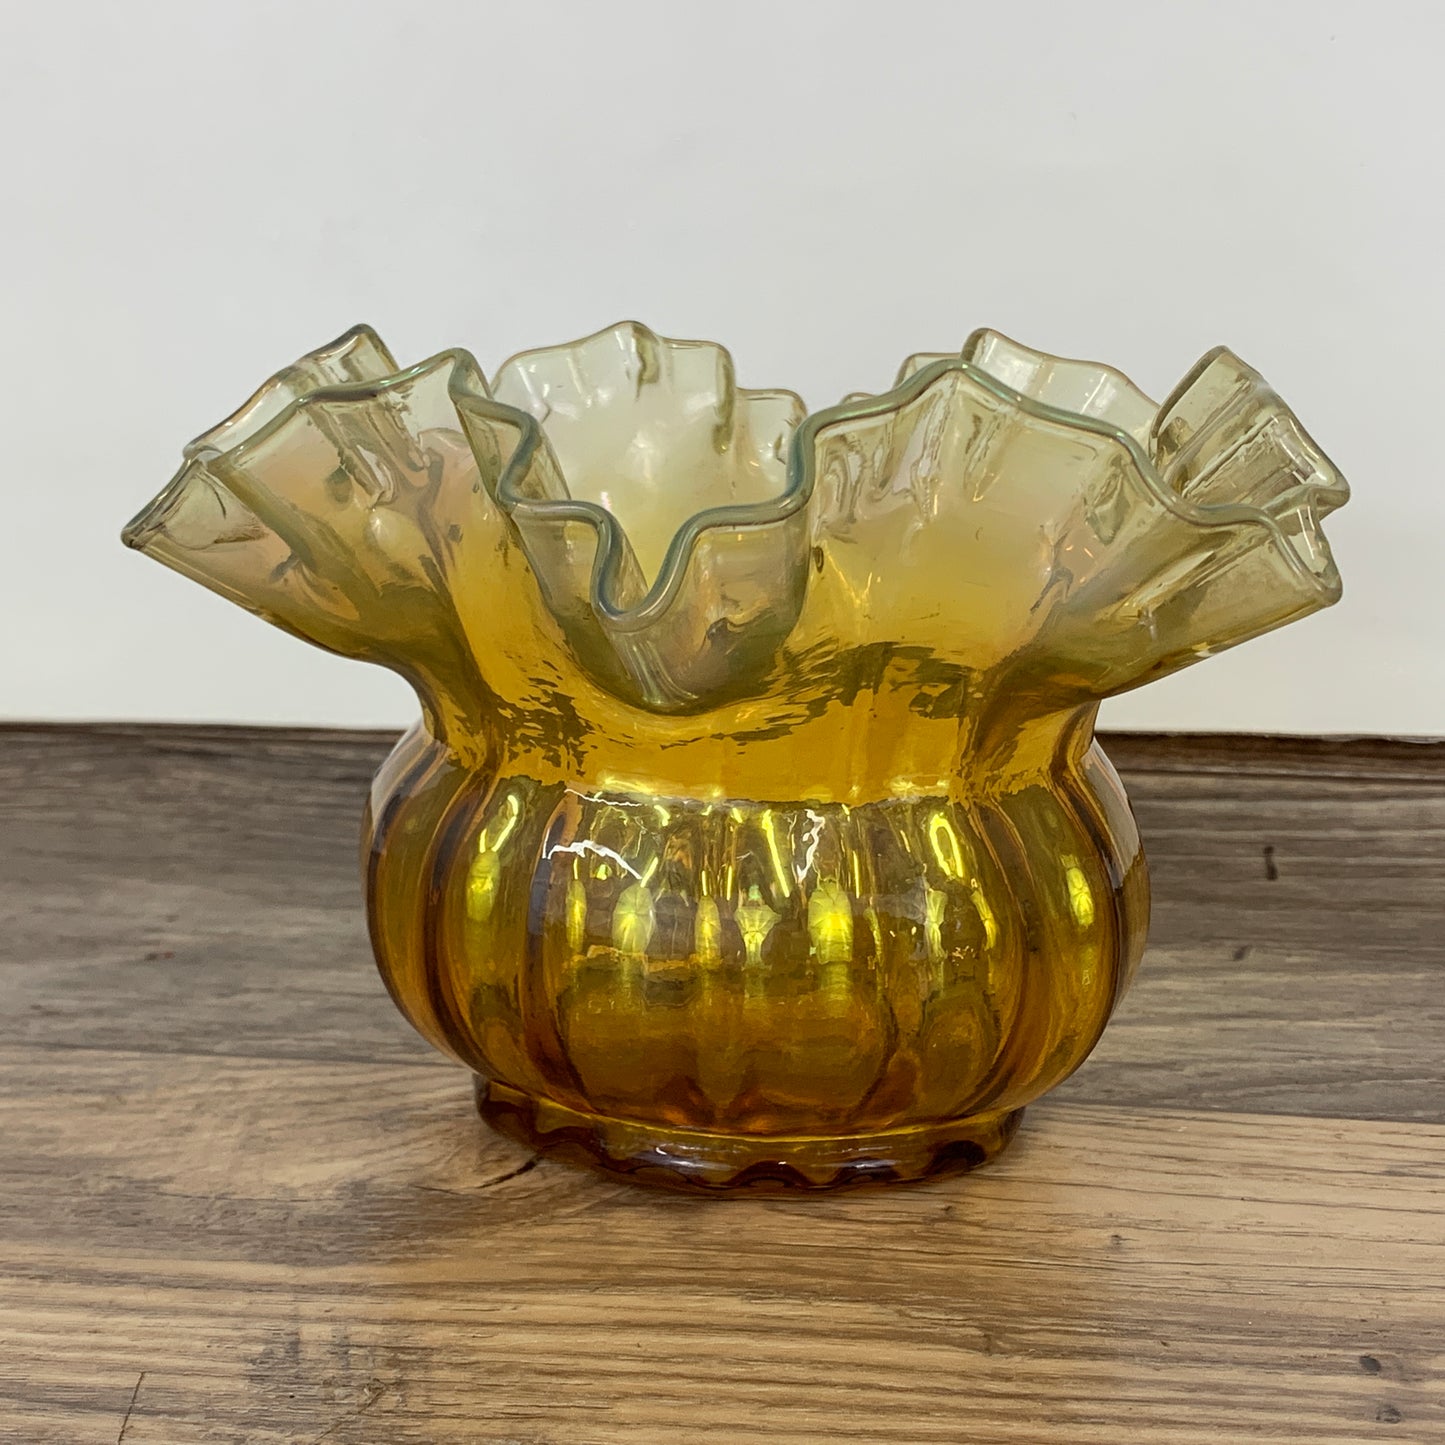 Vintage Carnival Glass Bowl with Crimped Rim, Amber Glass Ruffle Bowl